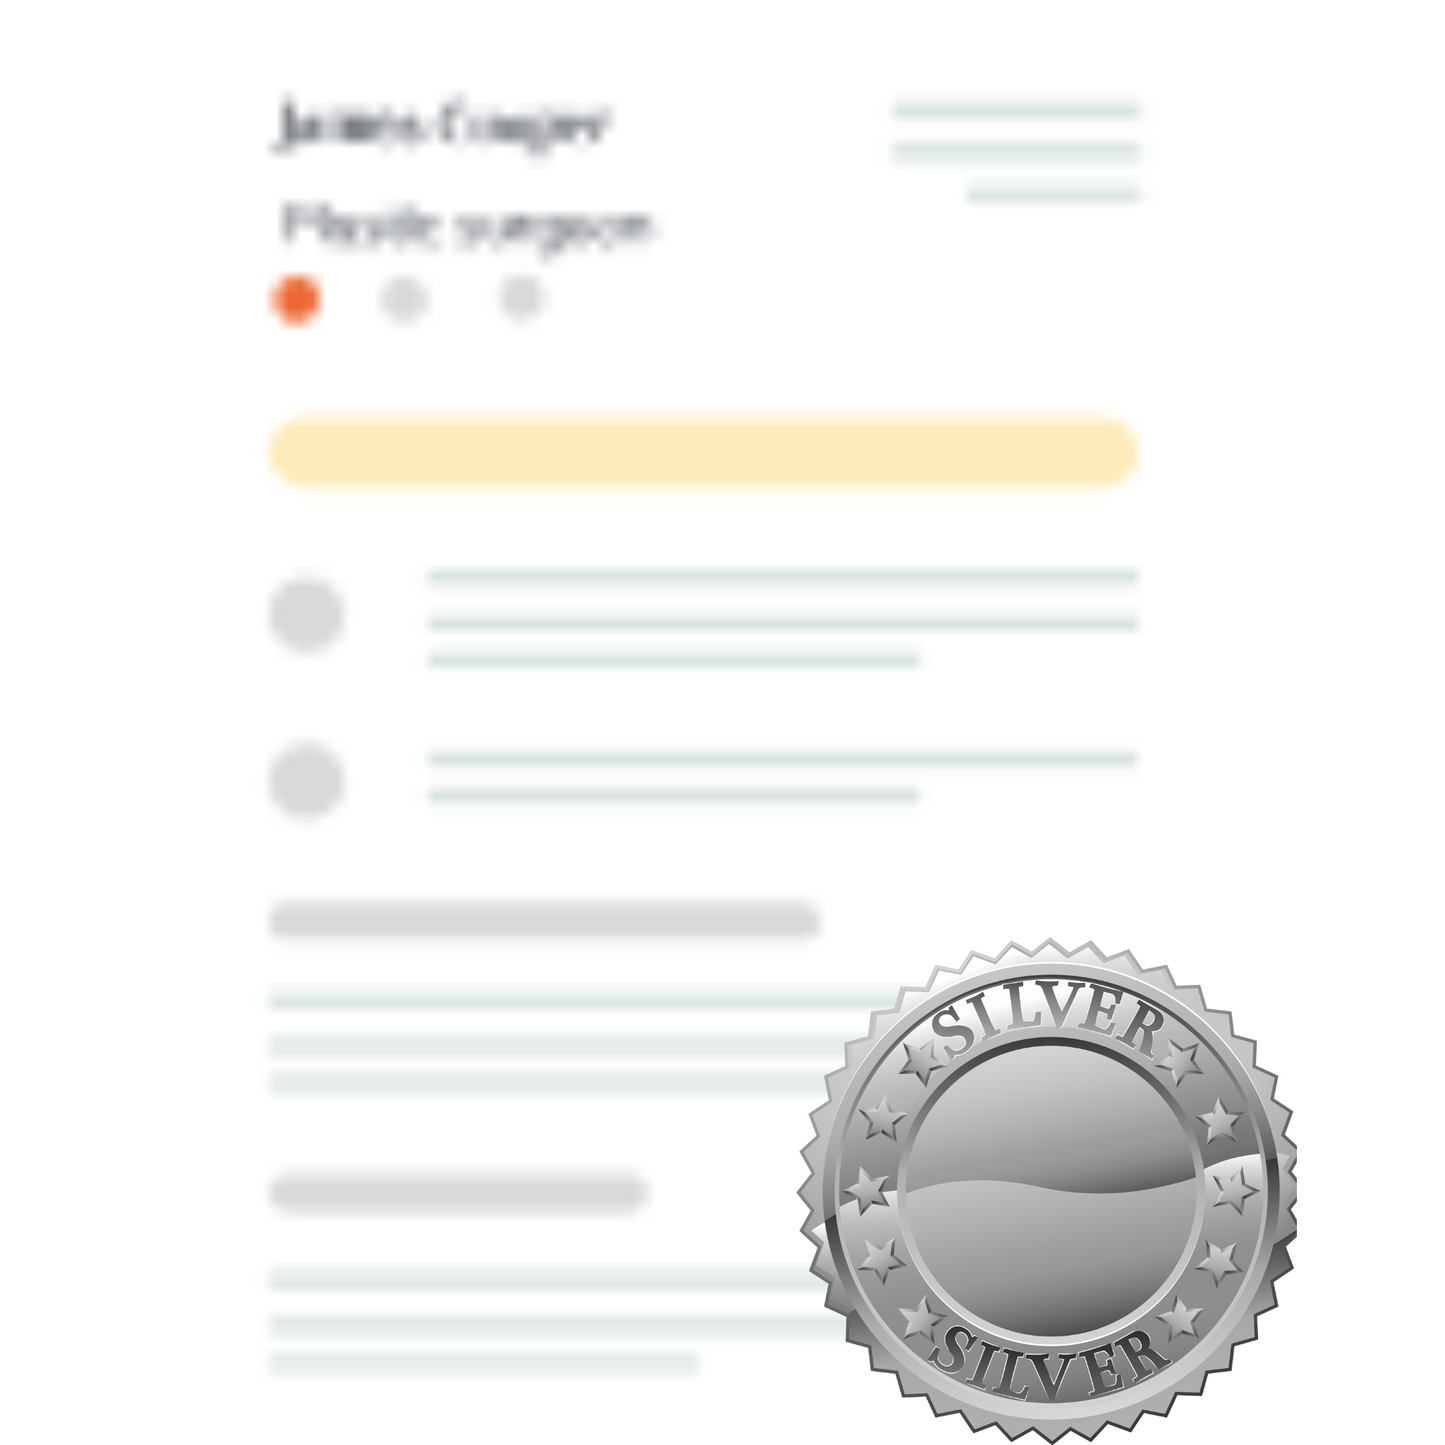 Silver Healthcare Resume Package (Resume + Cover Letter)